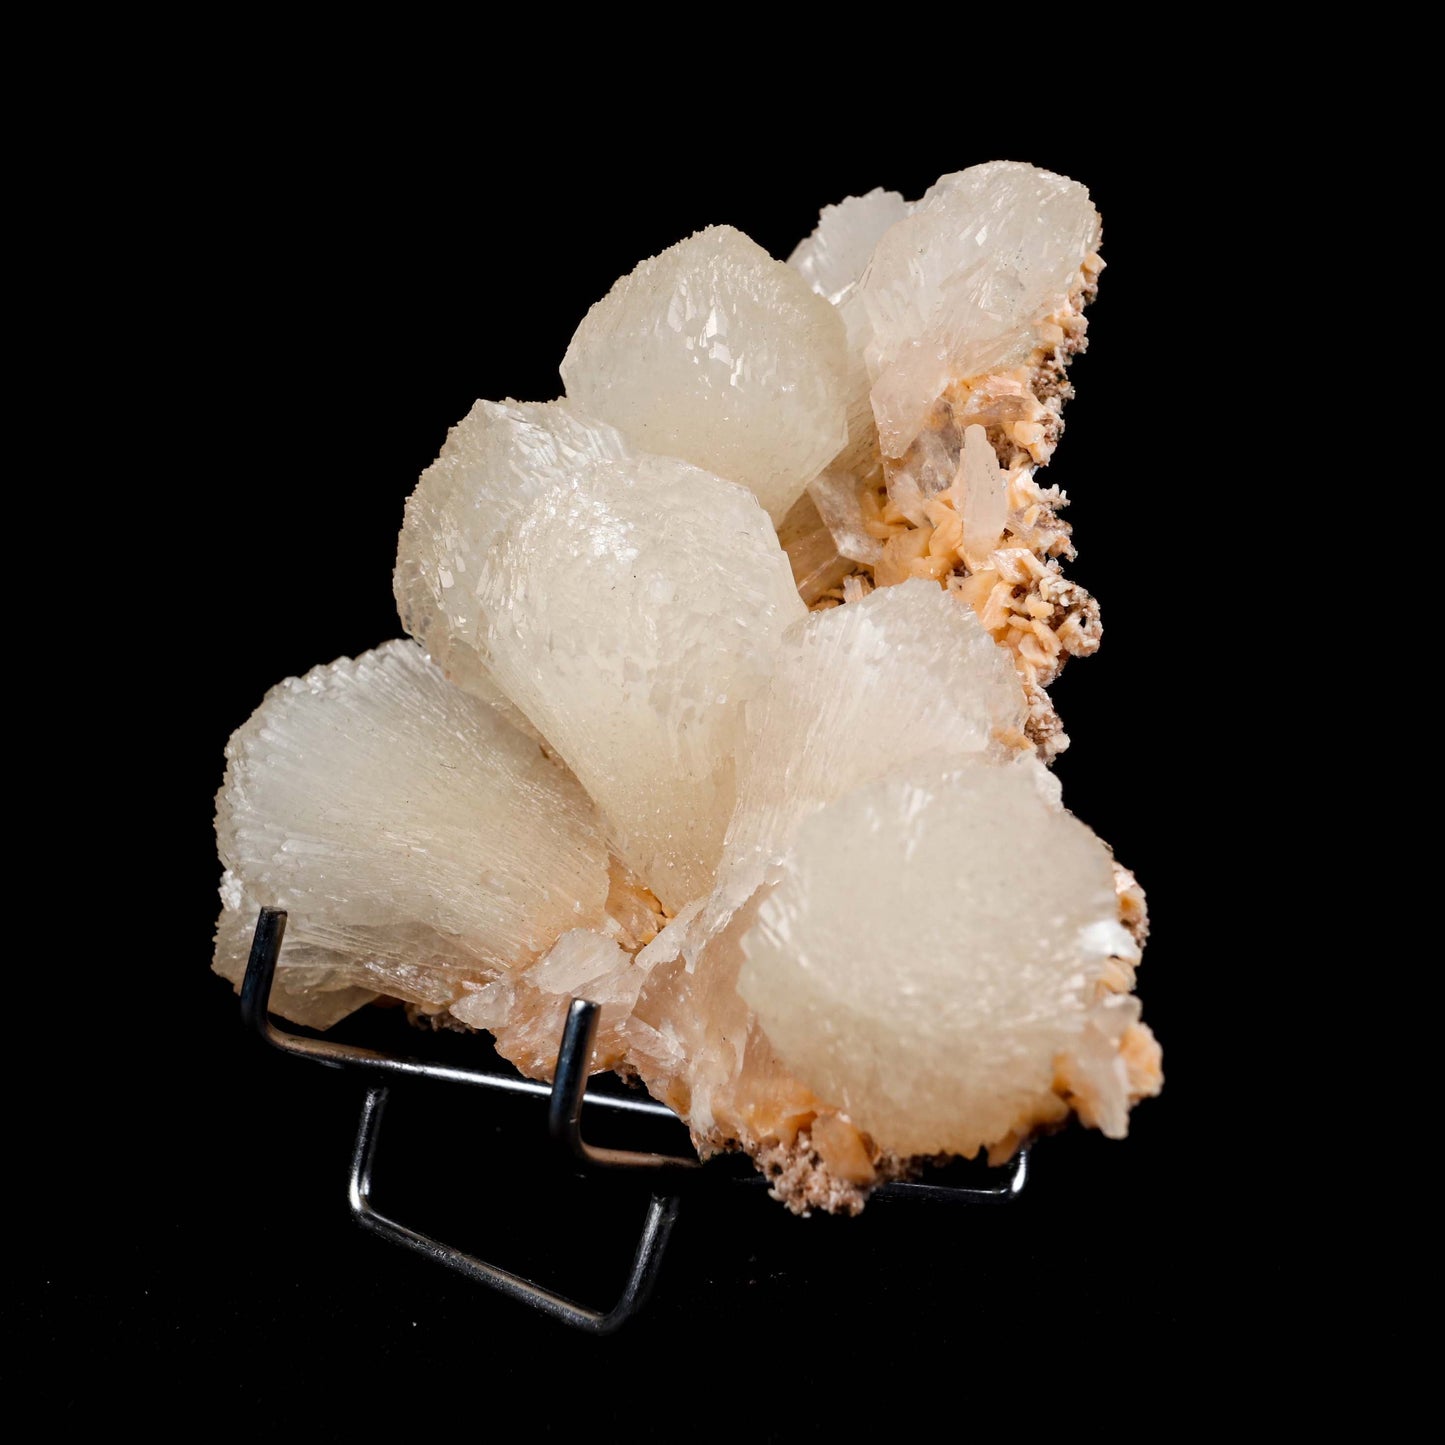 lustrous Terminated Stilbite Natural Mineral Specimen # B 4989  https://www.superbminerals.us/products/lustterorus-terminated-stilbite-natural-mineral-specimen-b-4989  Features:&nbsp;Featuring many excellent quality bladed groups of Stilbite in a soft white hue, resting over pearly stalactitic formations of peach colored Heulandite, this piece is a stunning example of the material. The sculpture is really flashy and three-dimensional, and I particularly like how the Stilbites